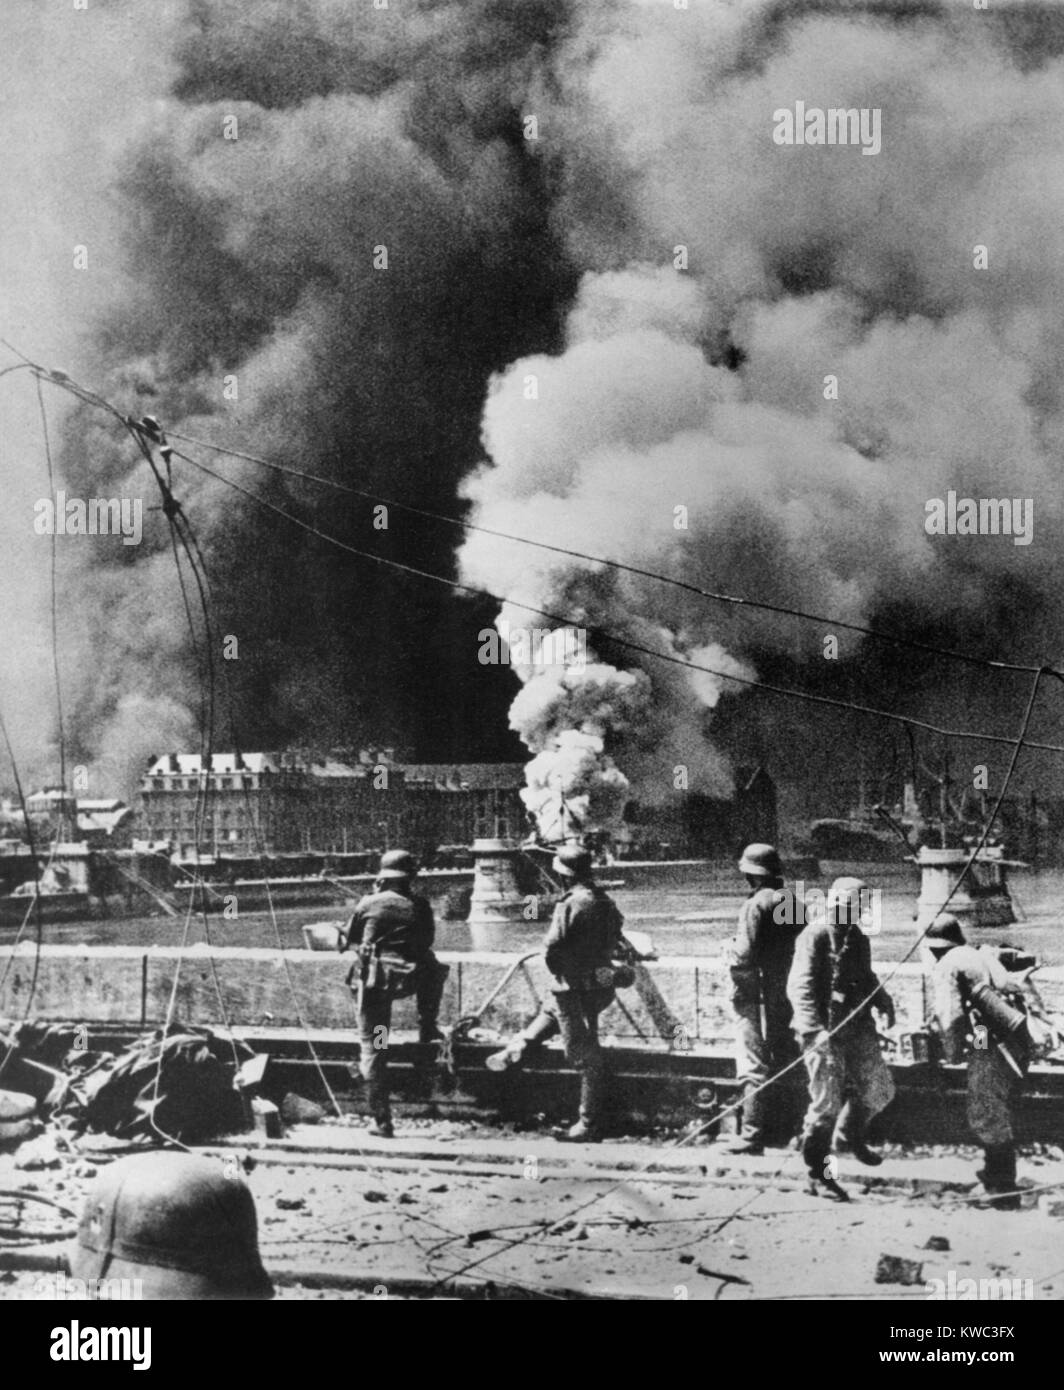 Rotterdam's city center burning after aerial bombardment by the Luftwaffe, May 14, 1940. Soon afterward the German air force threatened to destroy the city of Utrecht if the Dutch Government did not surrender, which they did. World War 2 (BSLOC 2015 13 89) Stock Photo